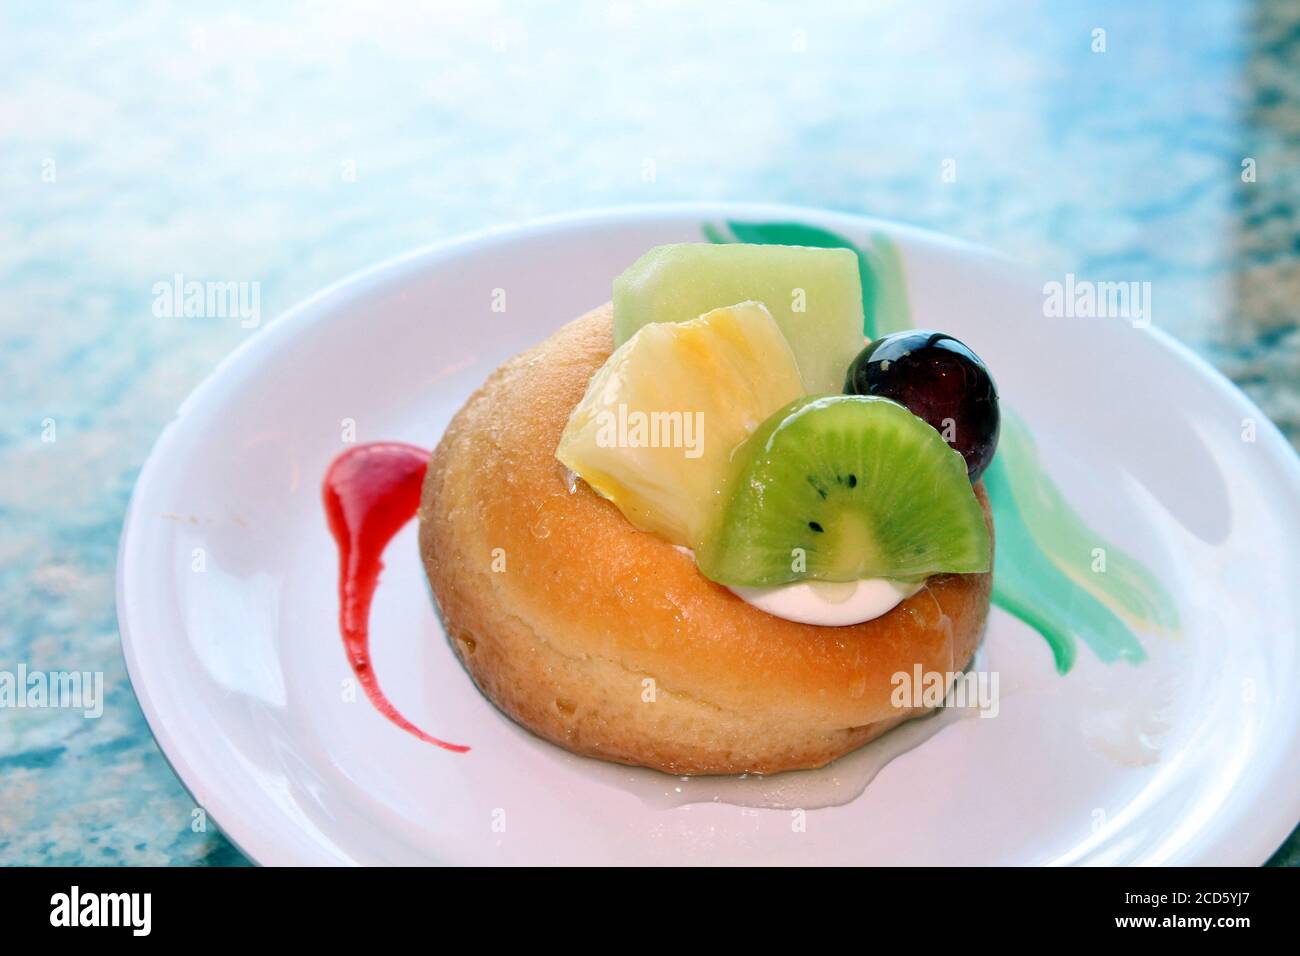 Cake dessert with kiwi, pineapple, and grapes Stock Photo